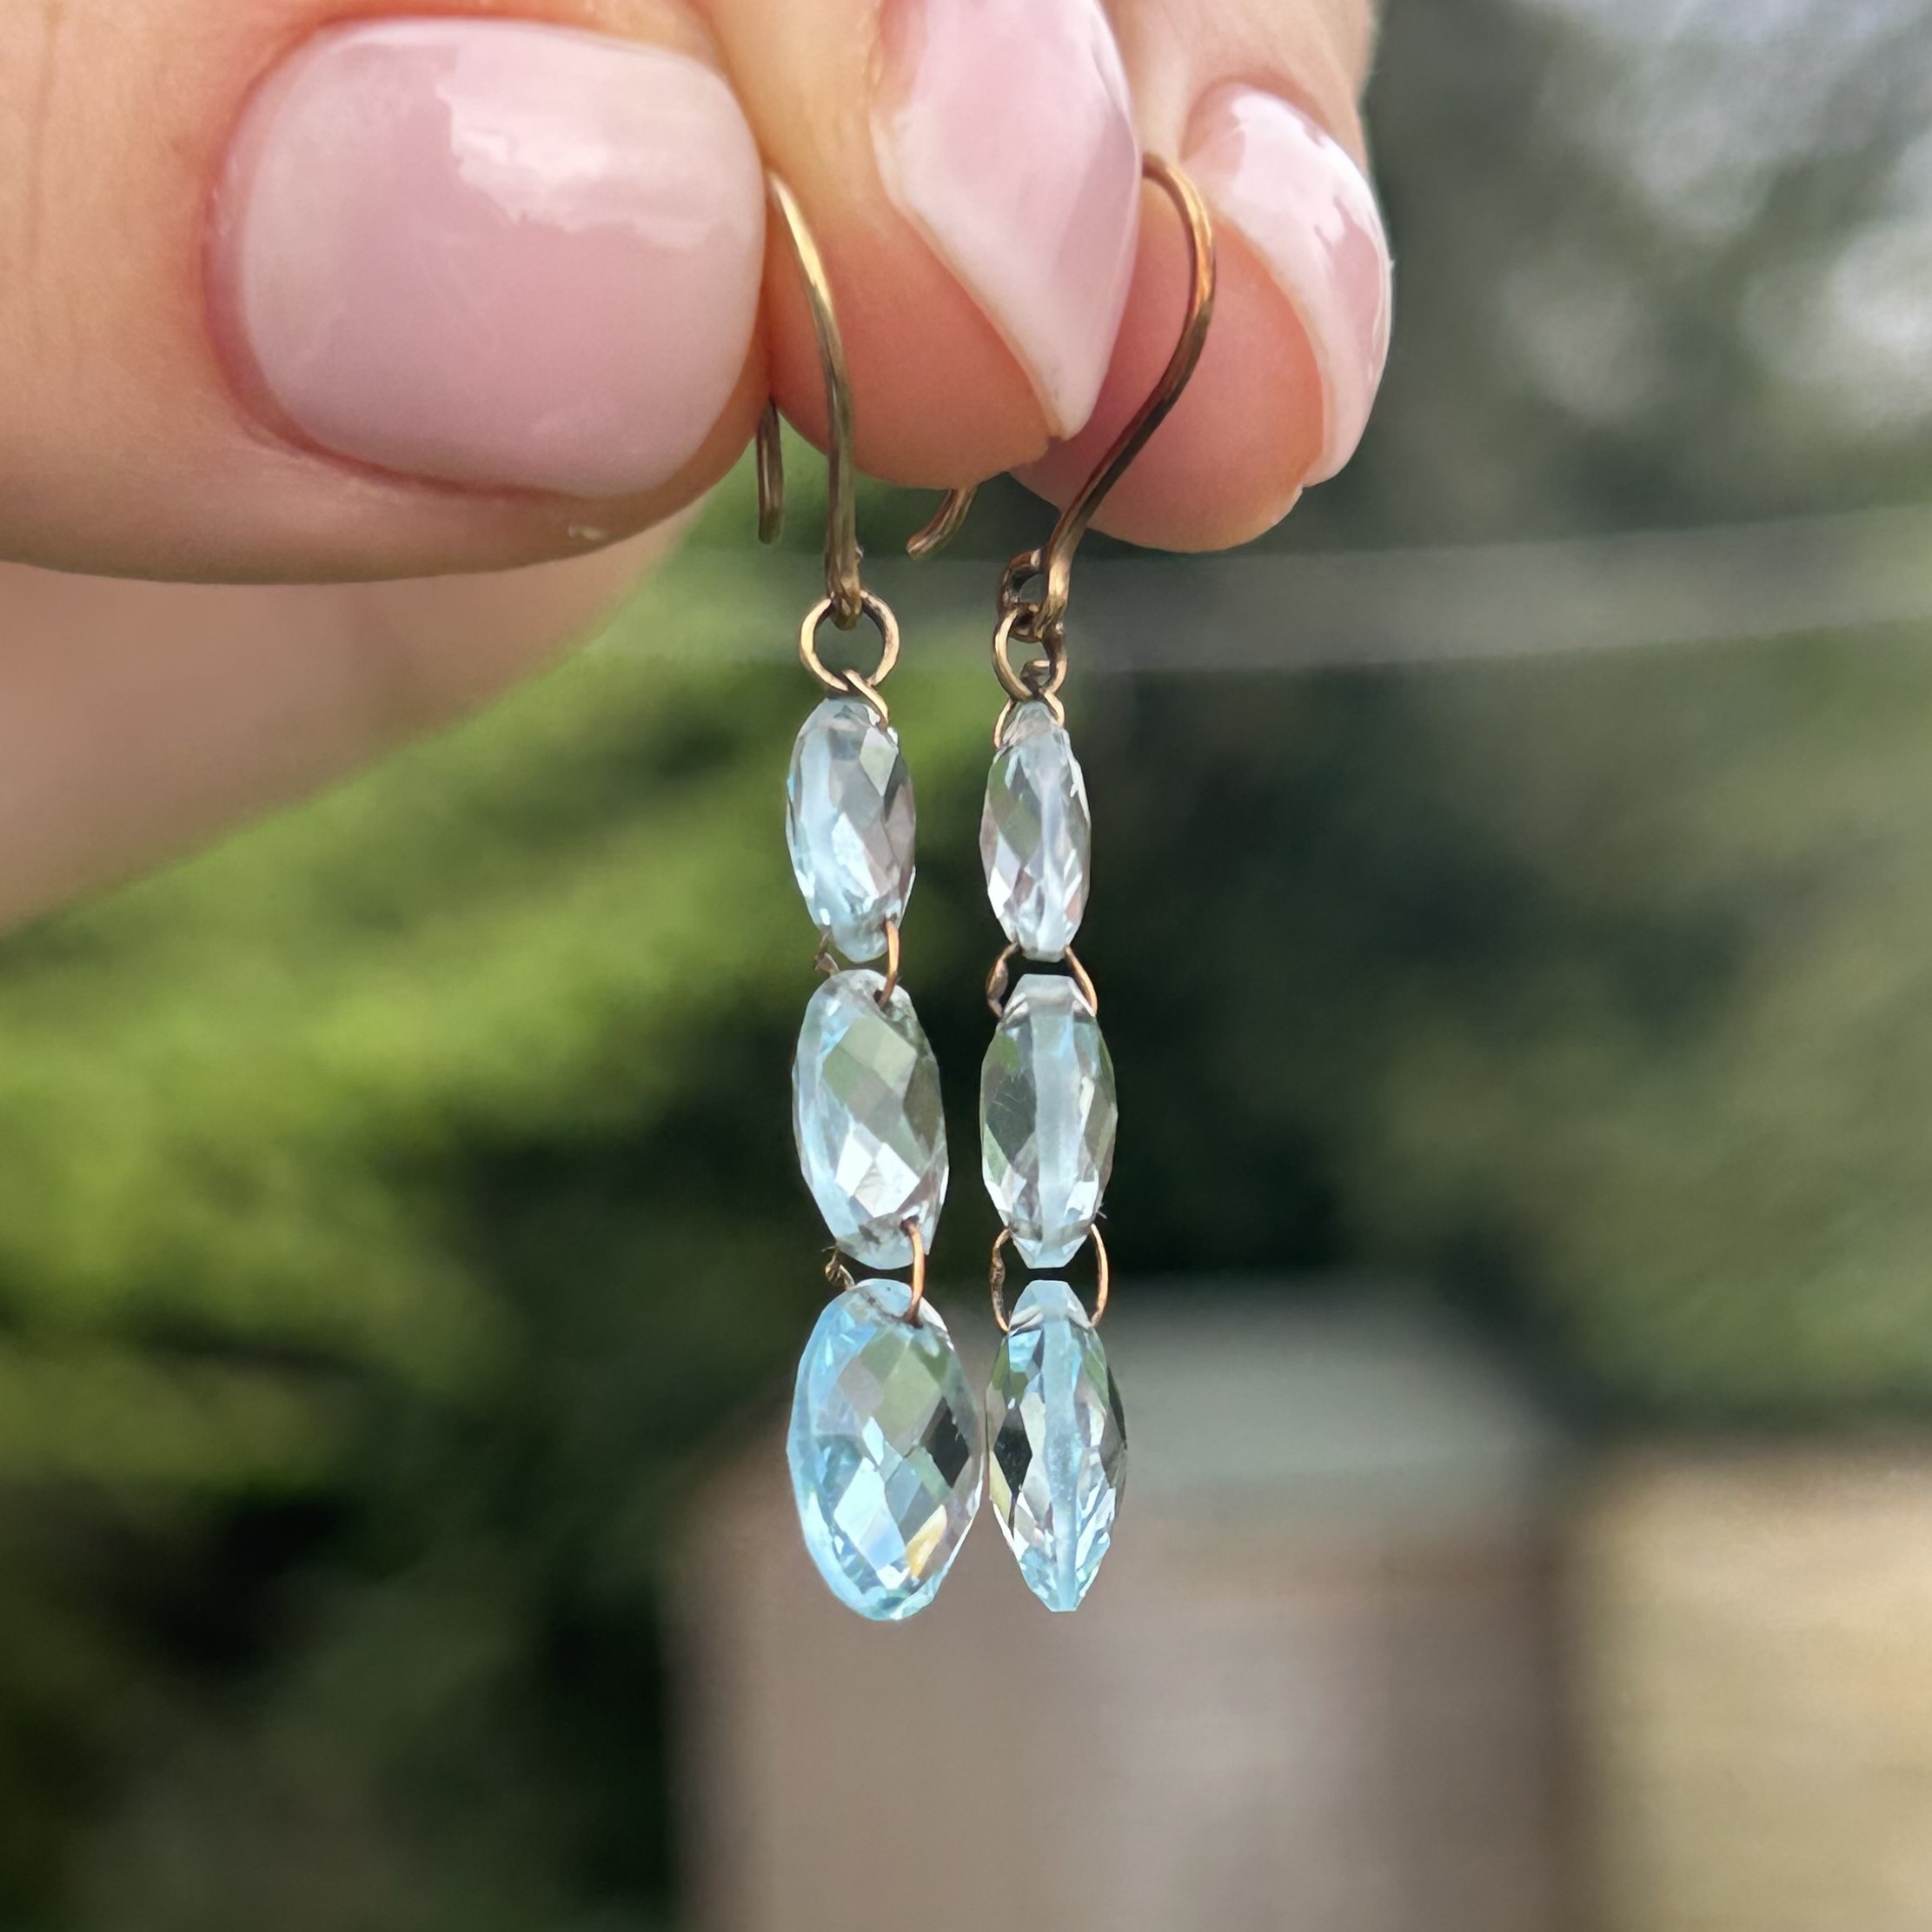 9ct gold faceted blue topaz drop earrings with French hooks 2.1 g - Image 5 of 5